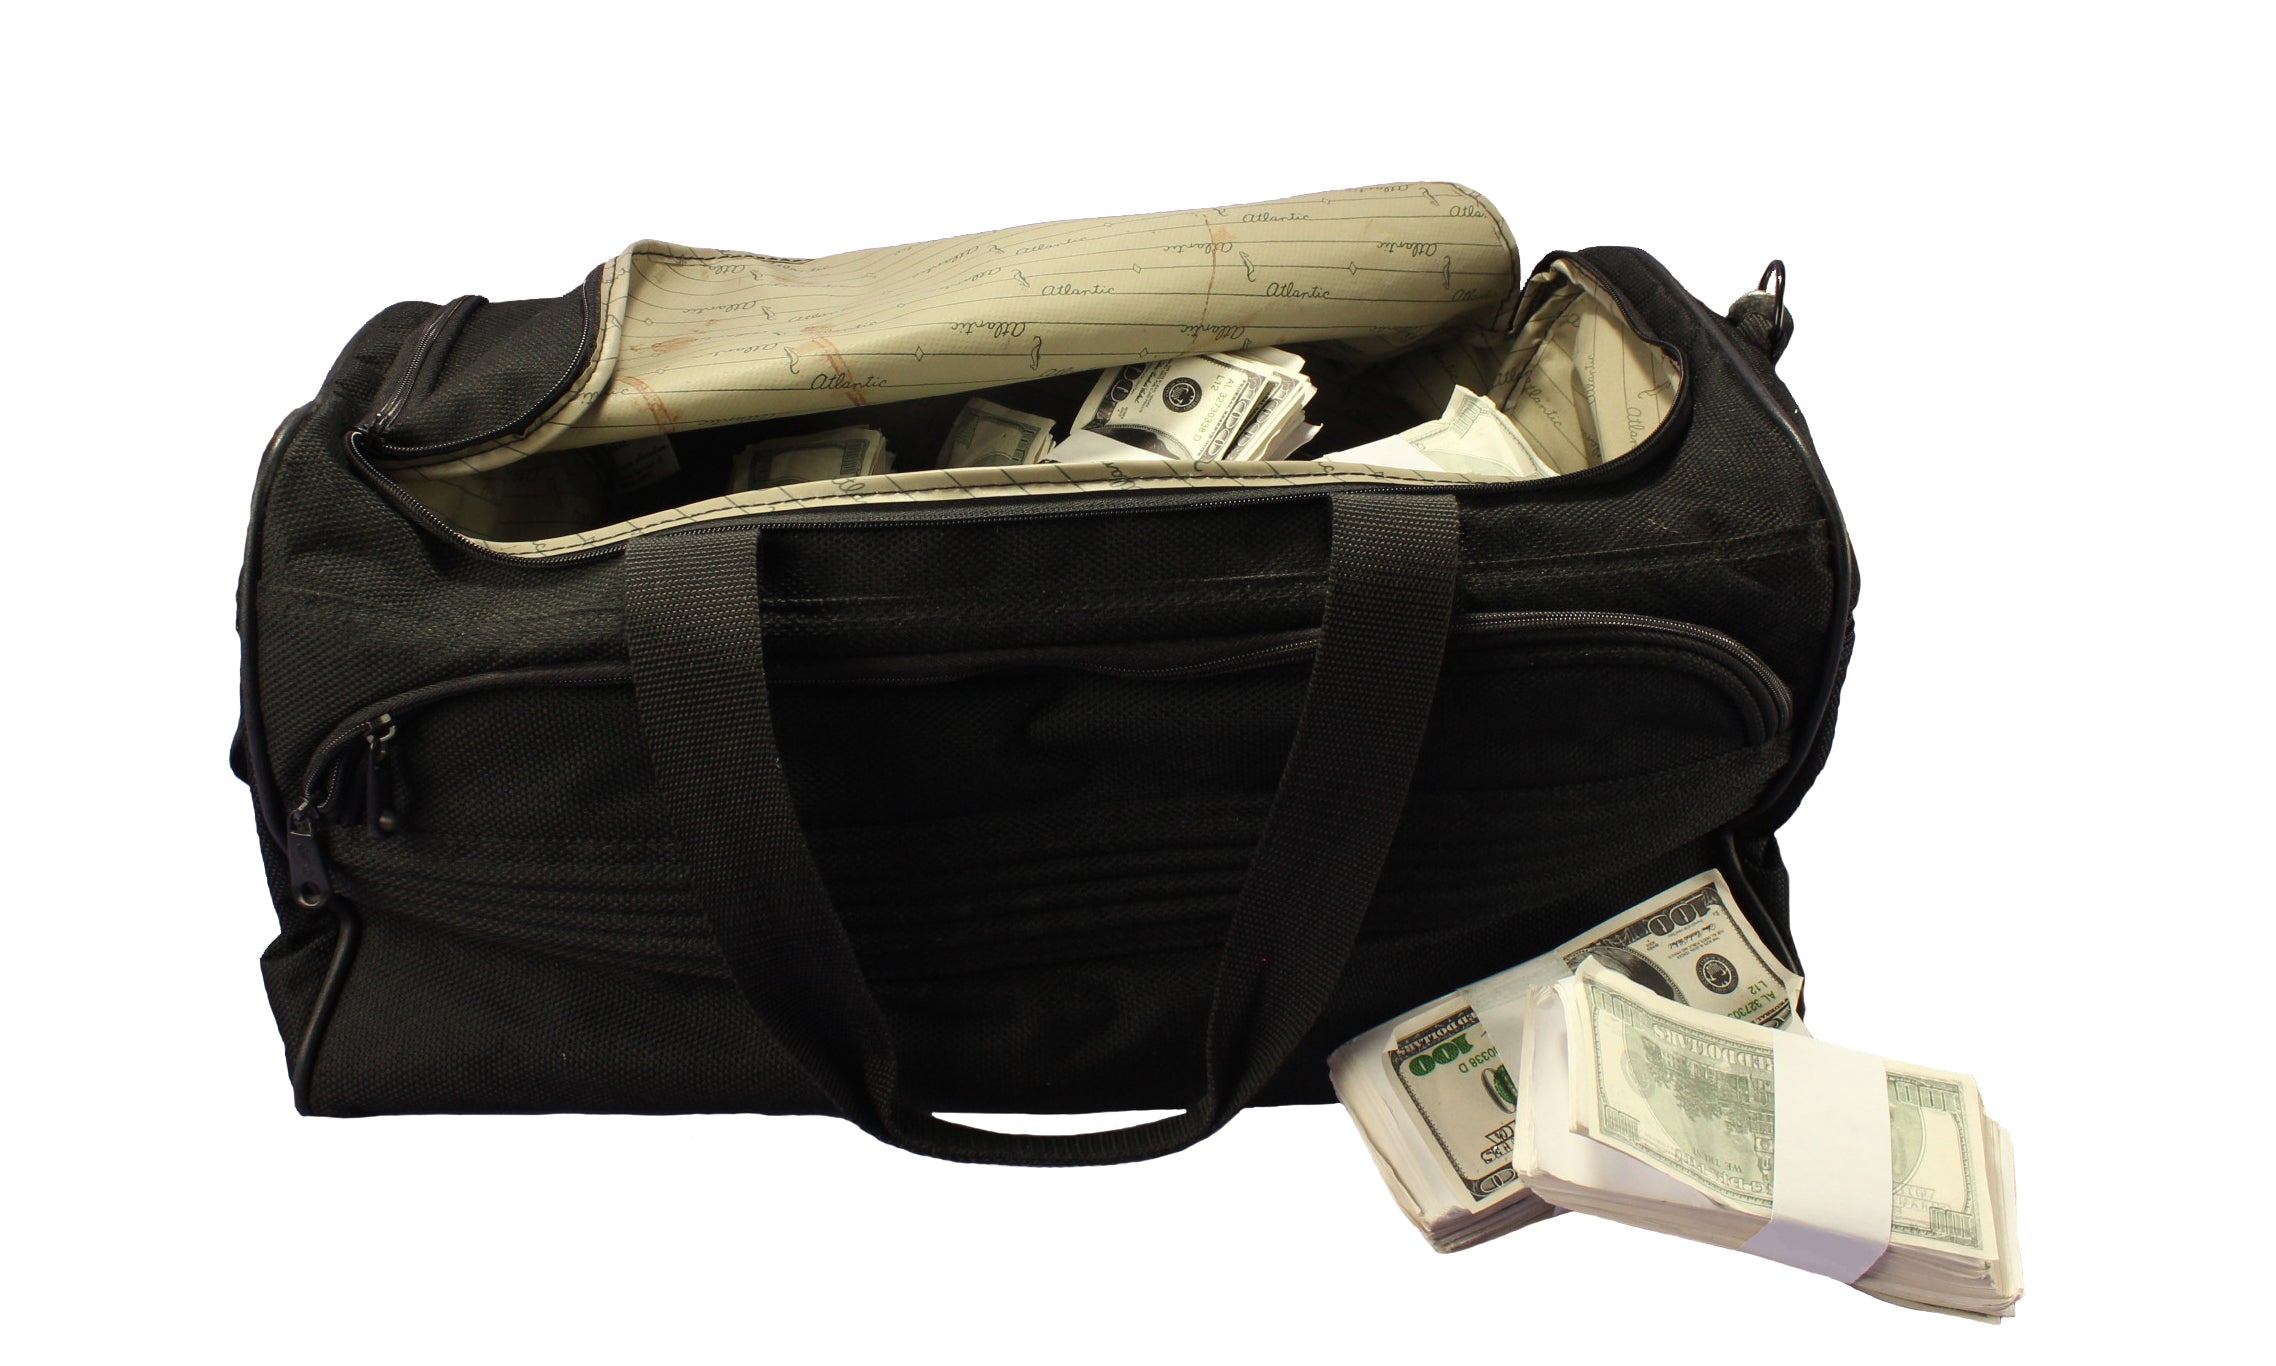 MONEY $ Duffle Bag for Sale by abigabhall